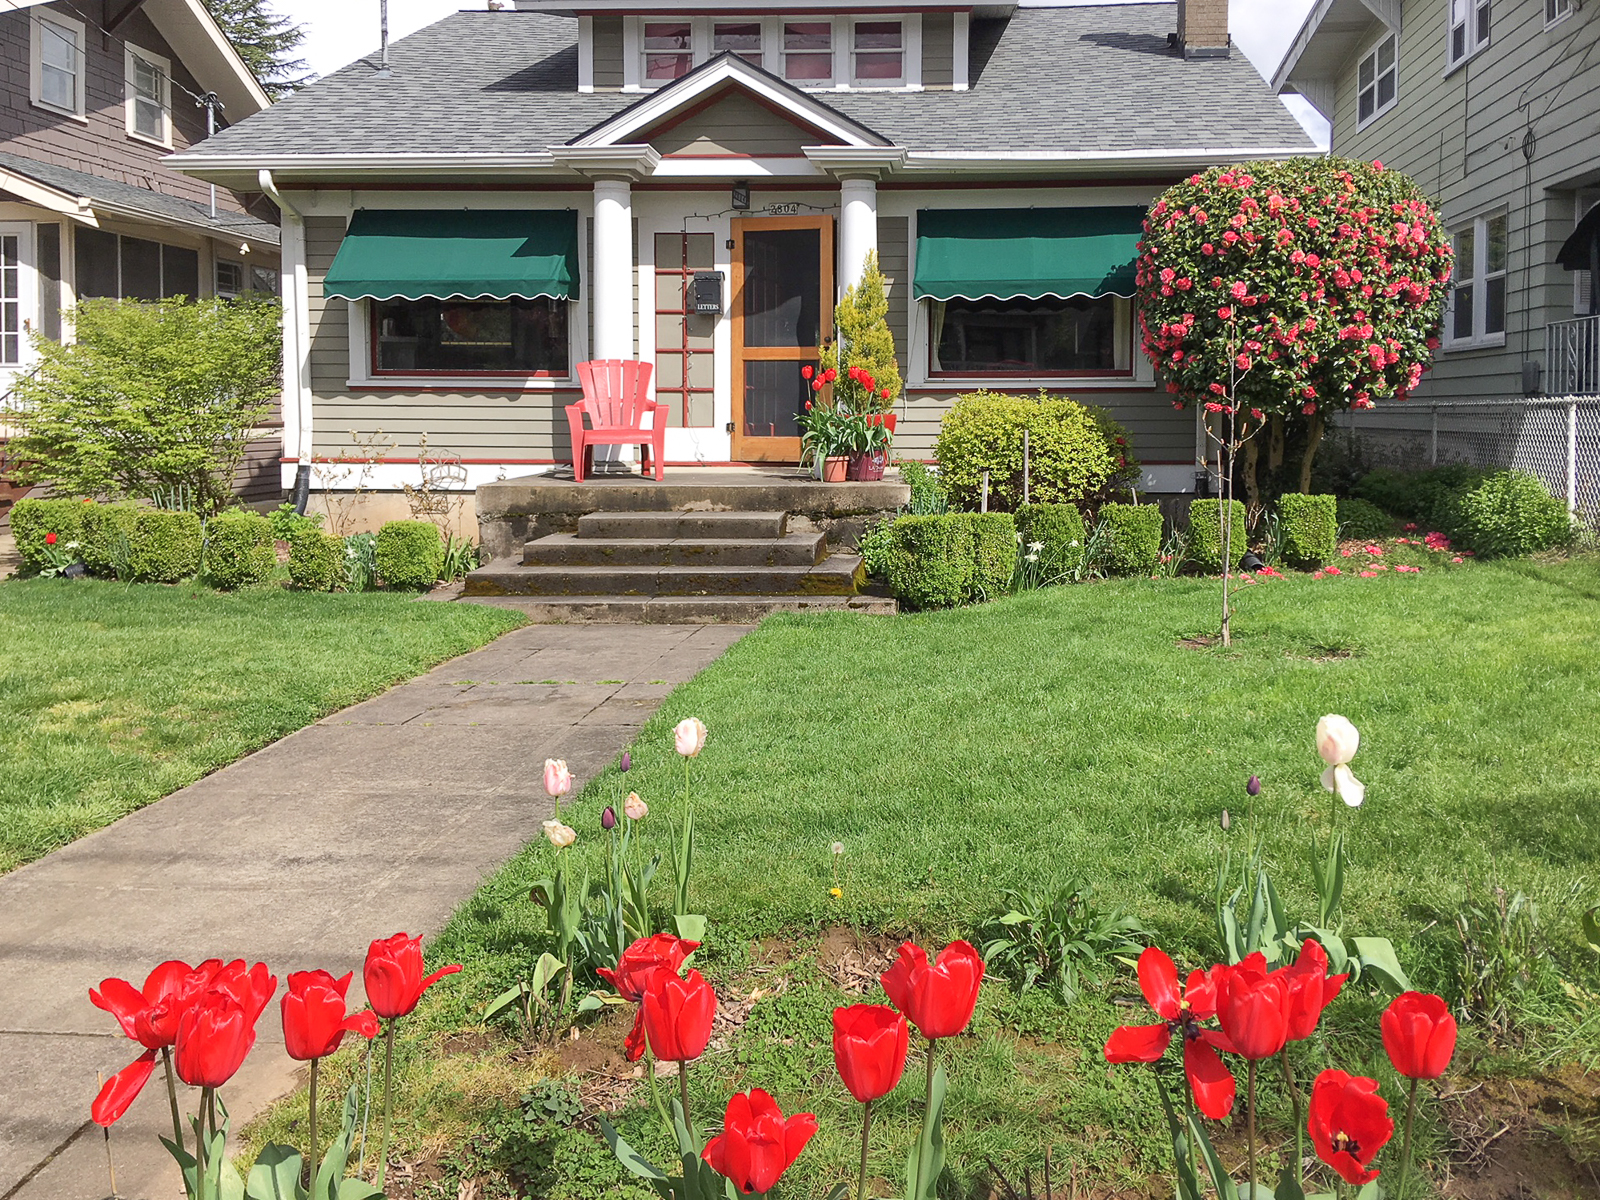 SOLD for $639,000 in 6 DOM! 2804 SE 35th Ave. Portland 97202 - Orig List: $629k